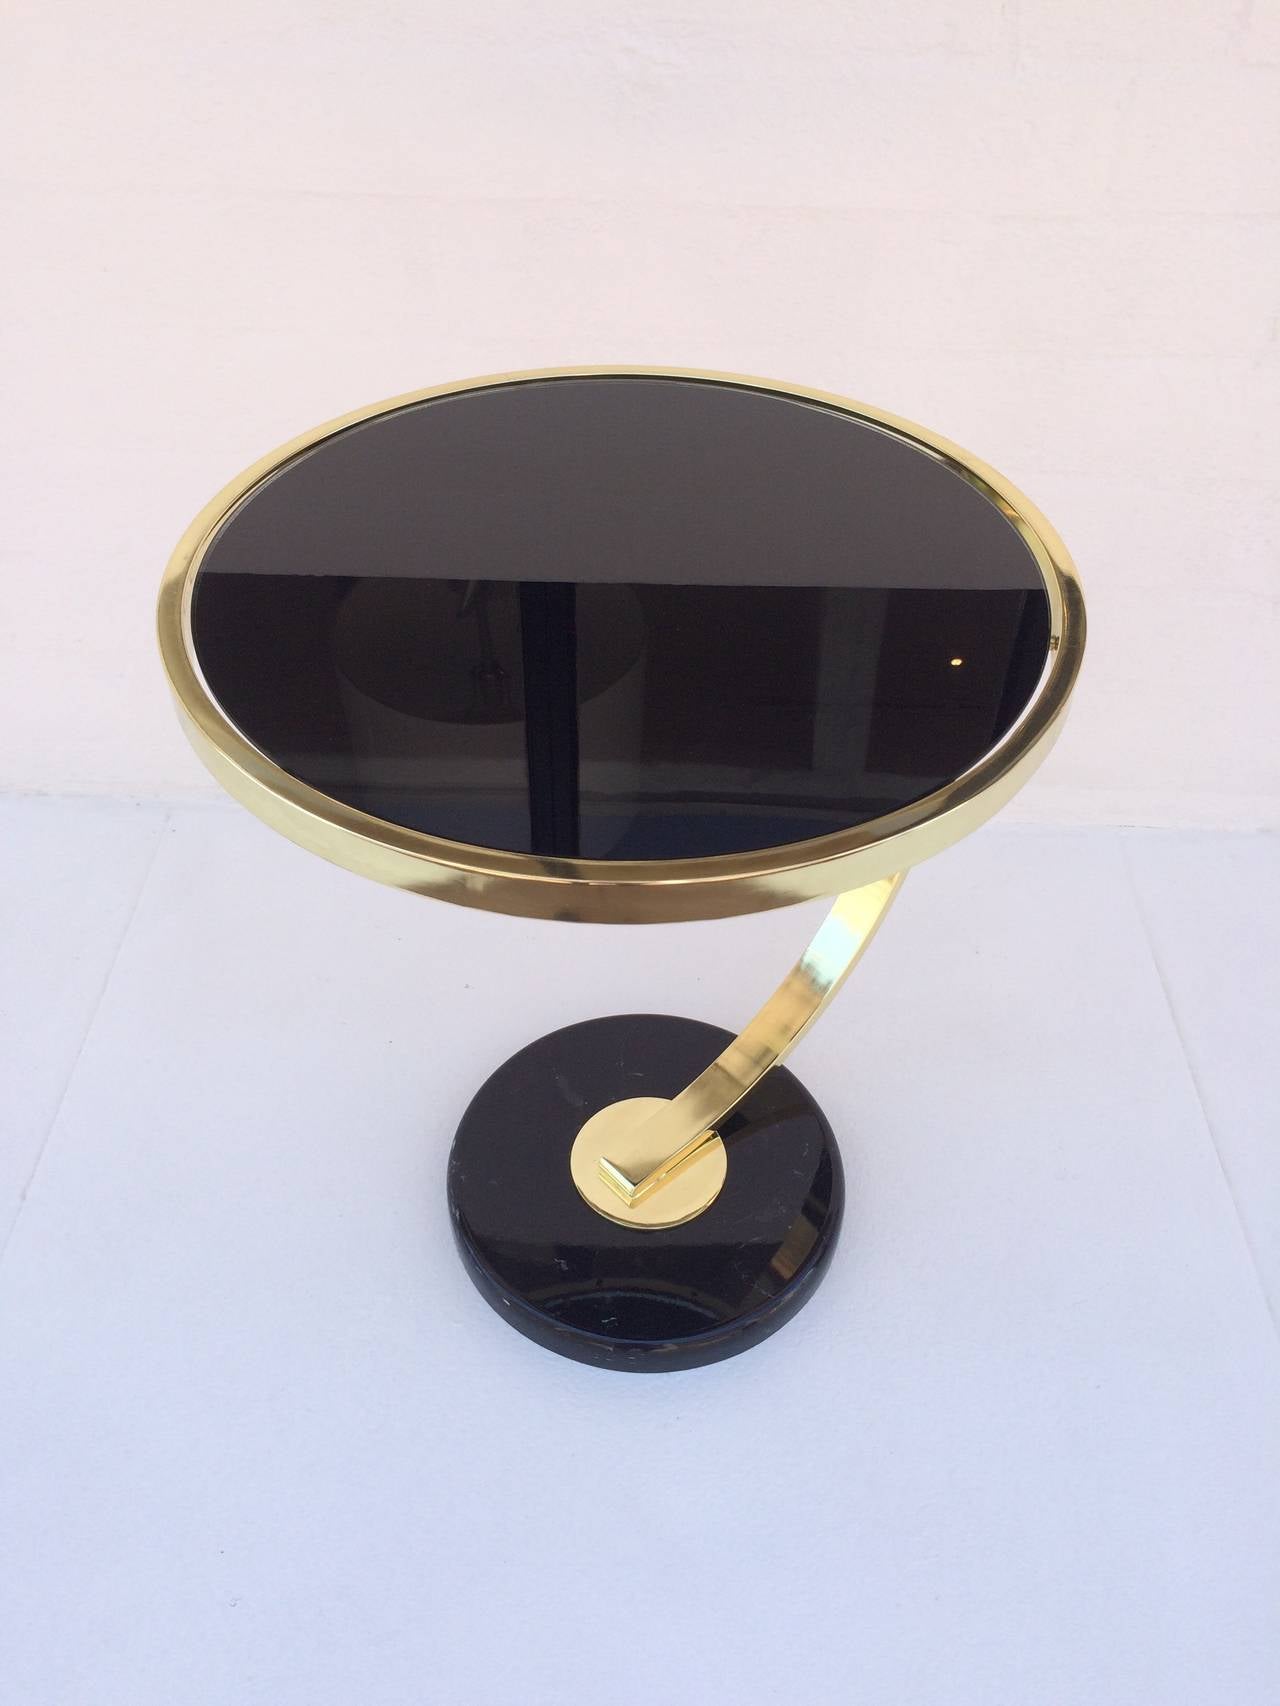 American Polished Brass and Black Glass Side Table by Milo Baughman for DIA